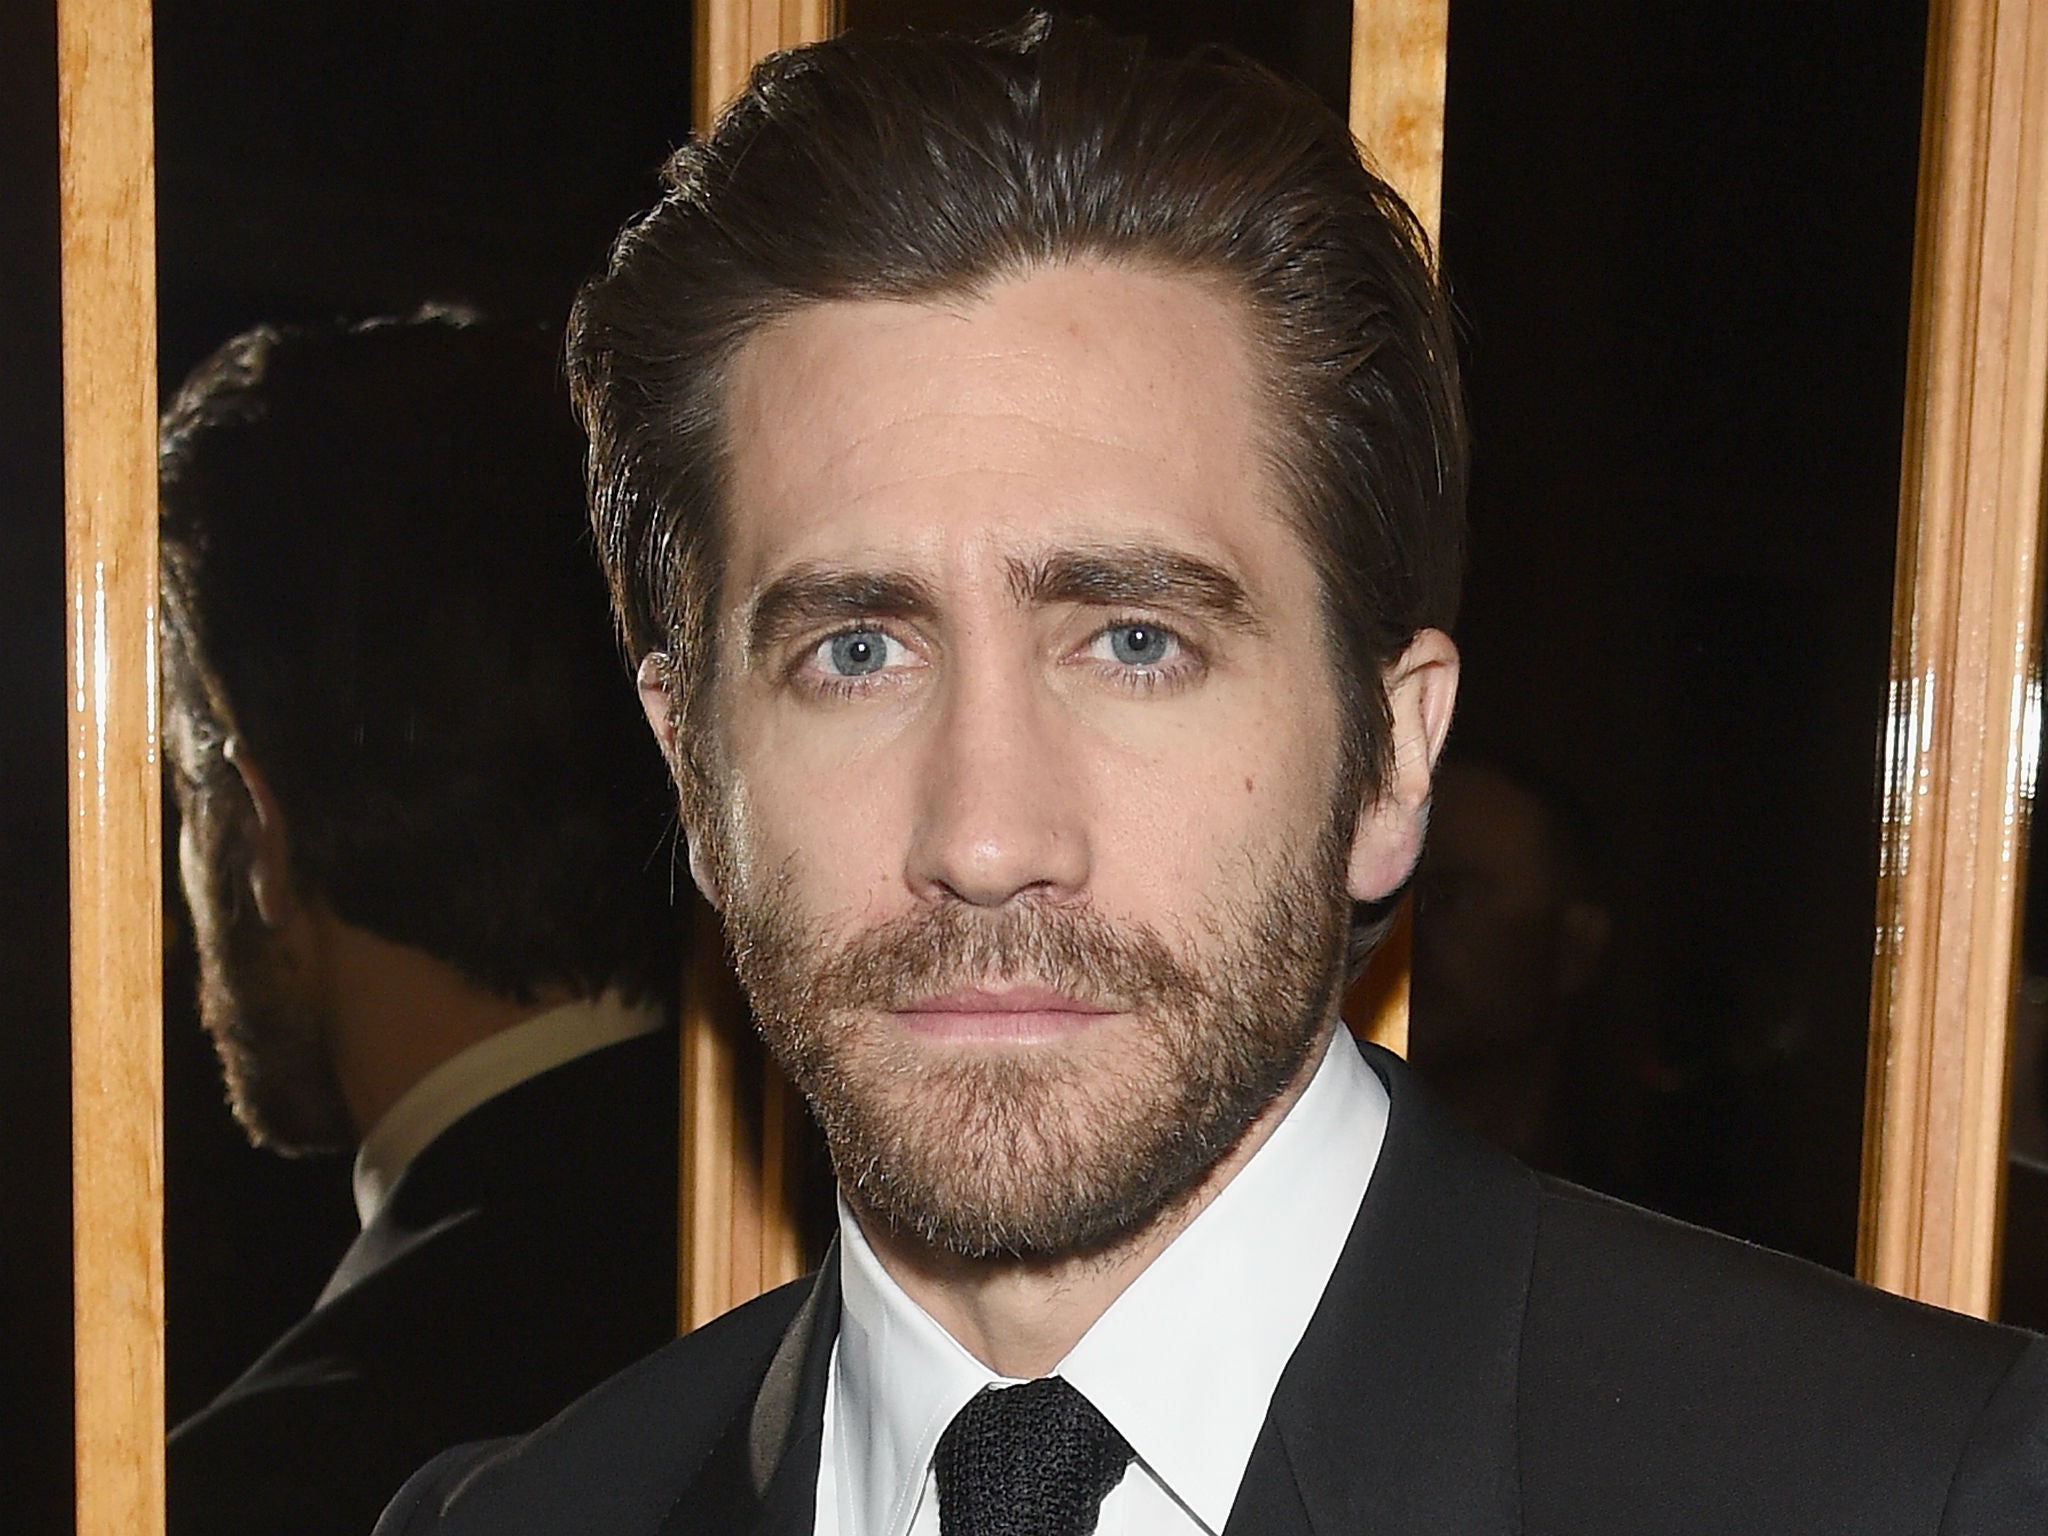 Don't ask Jake Gyllenhaal about Taylor Swift